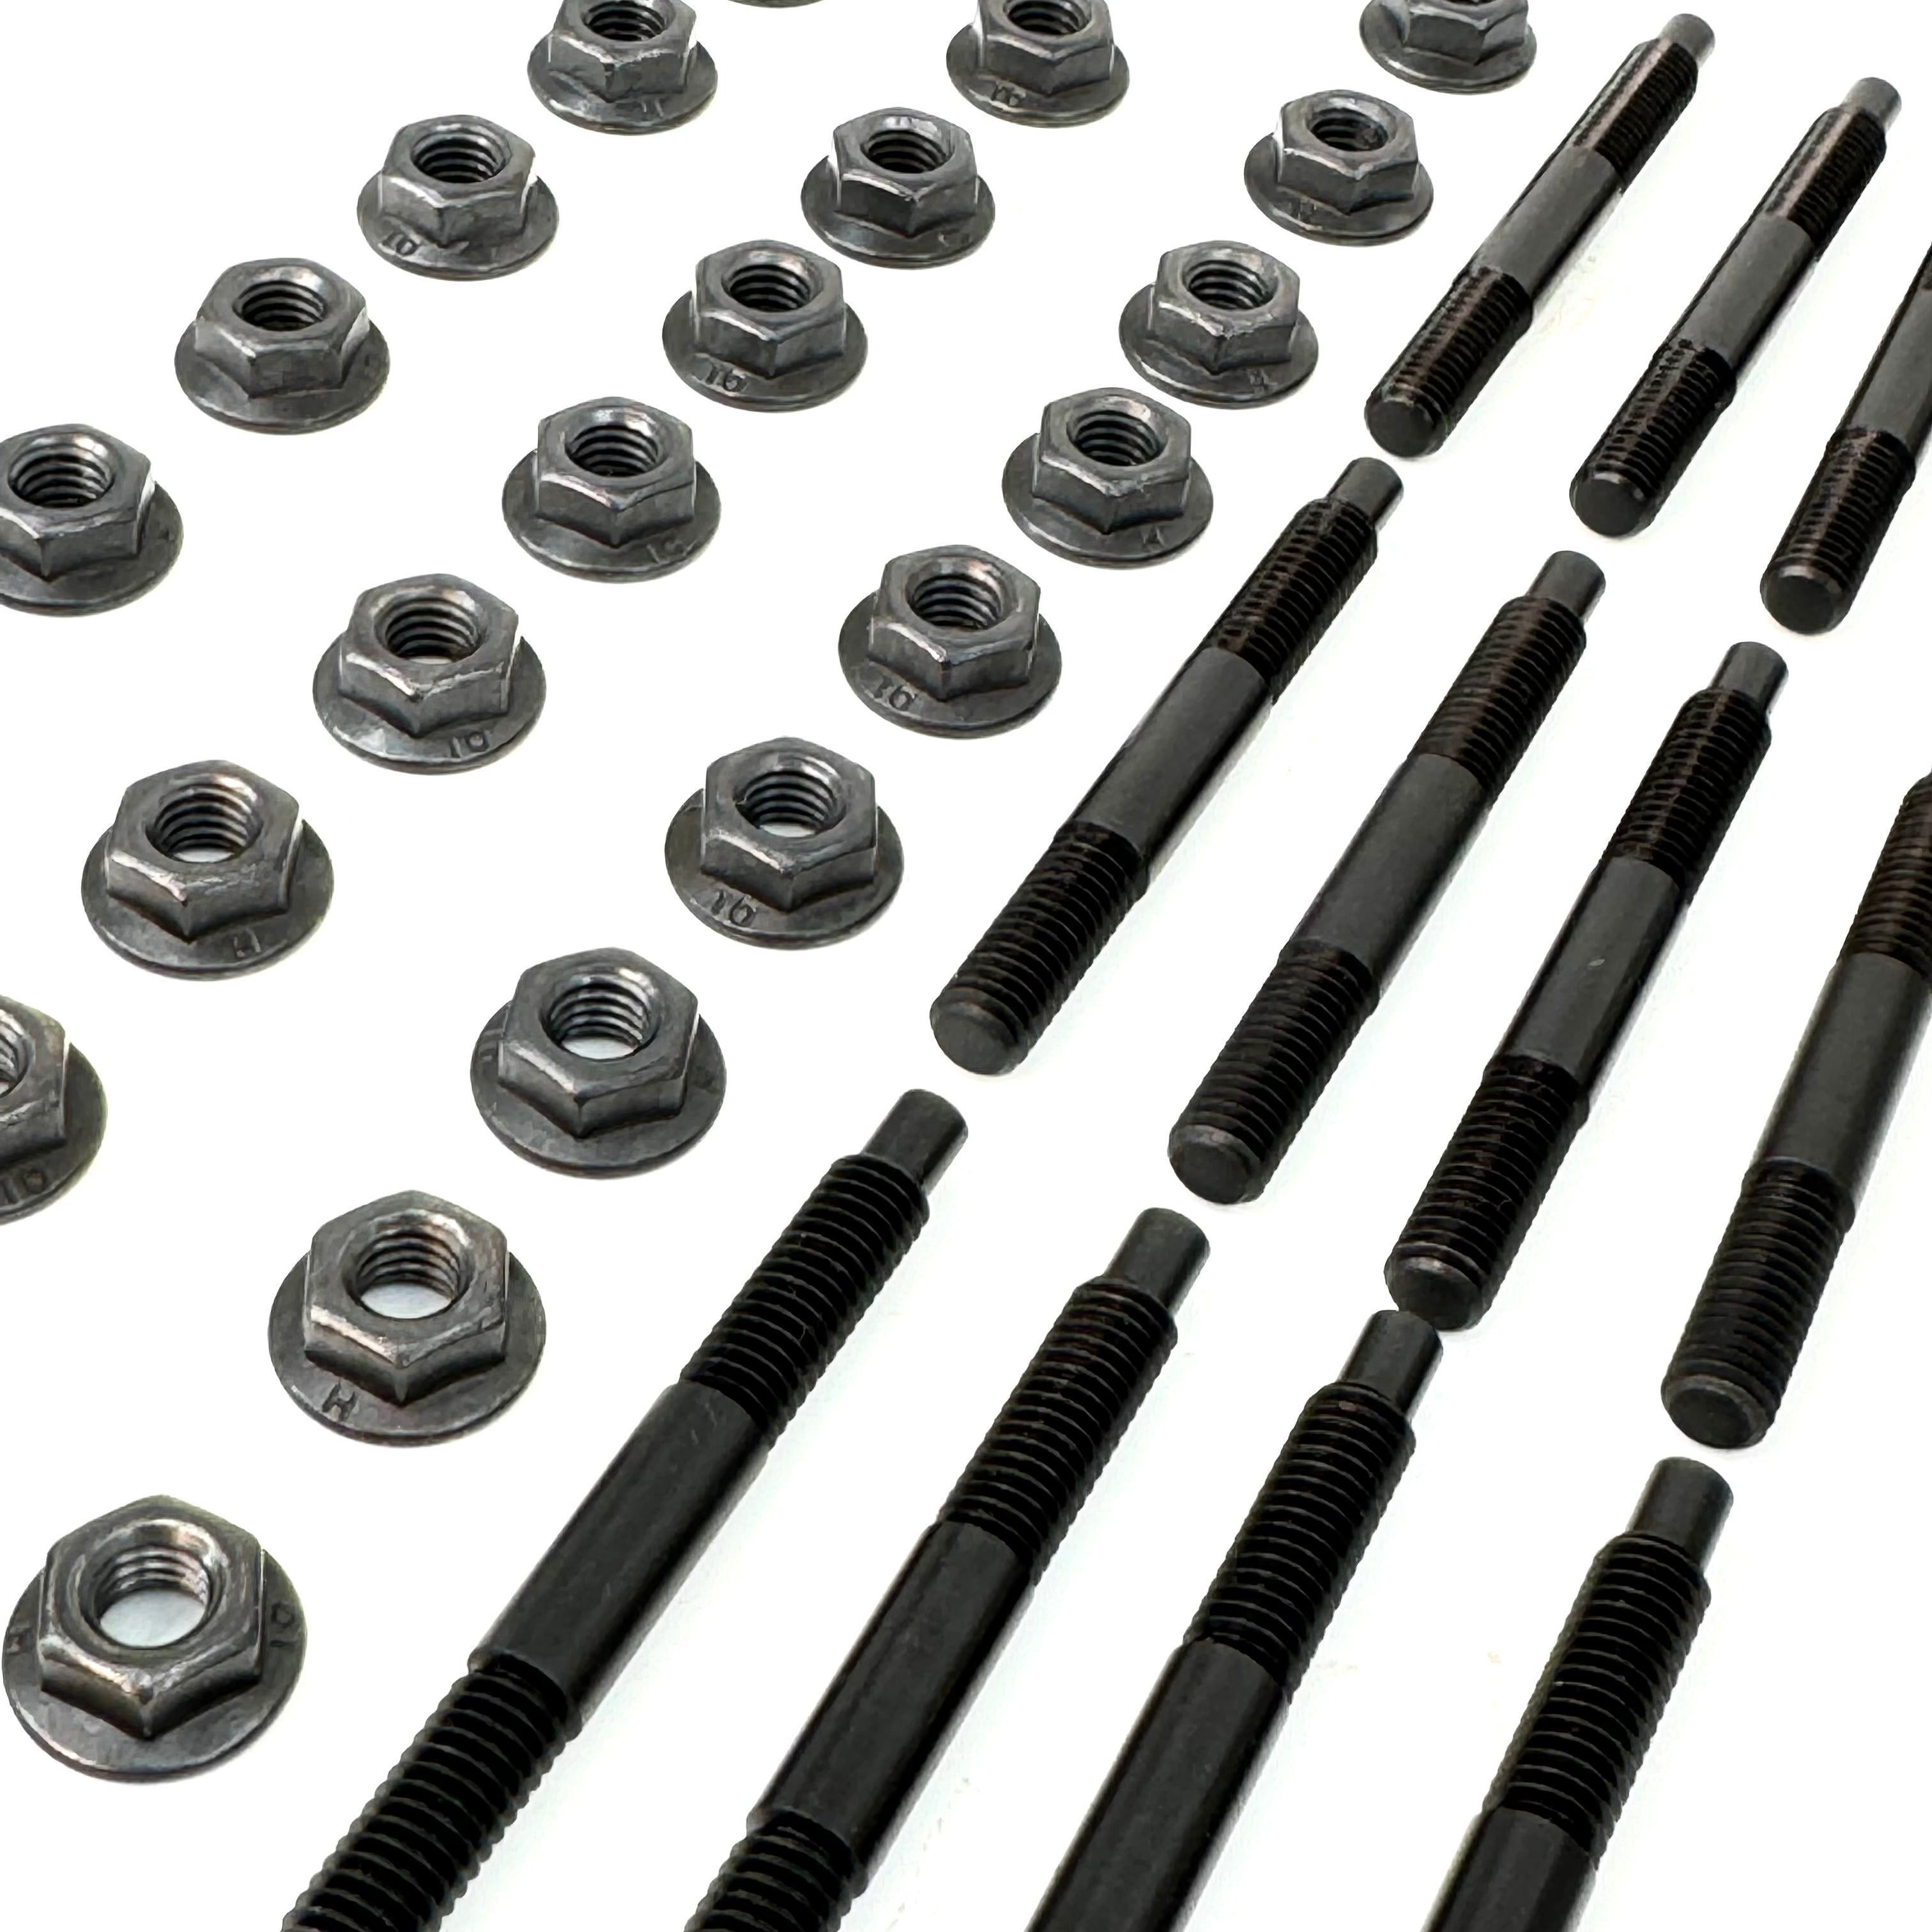 RB cam baffle plate kit with cam studs